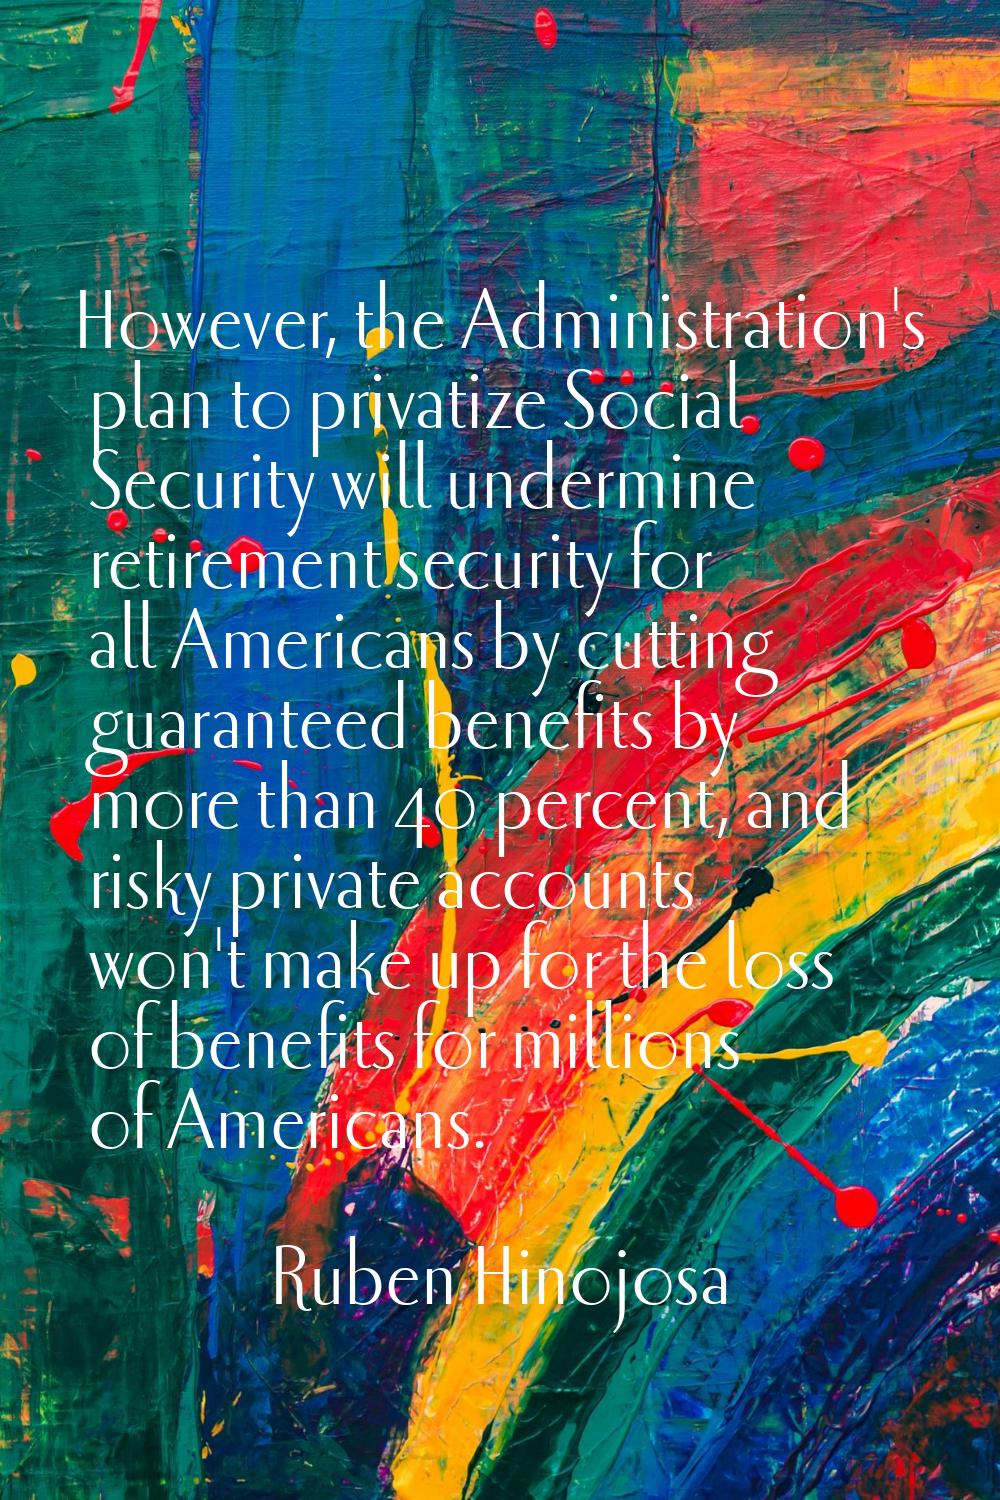 However, the Administration's plan to privatize Social Security will undermine retirement security 